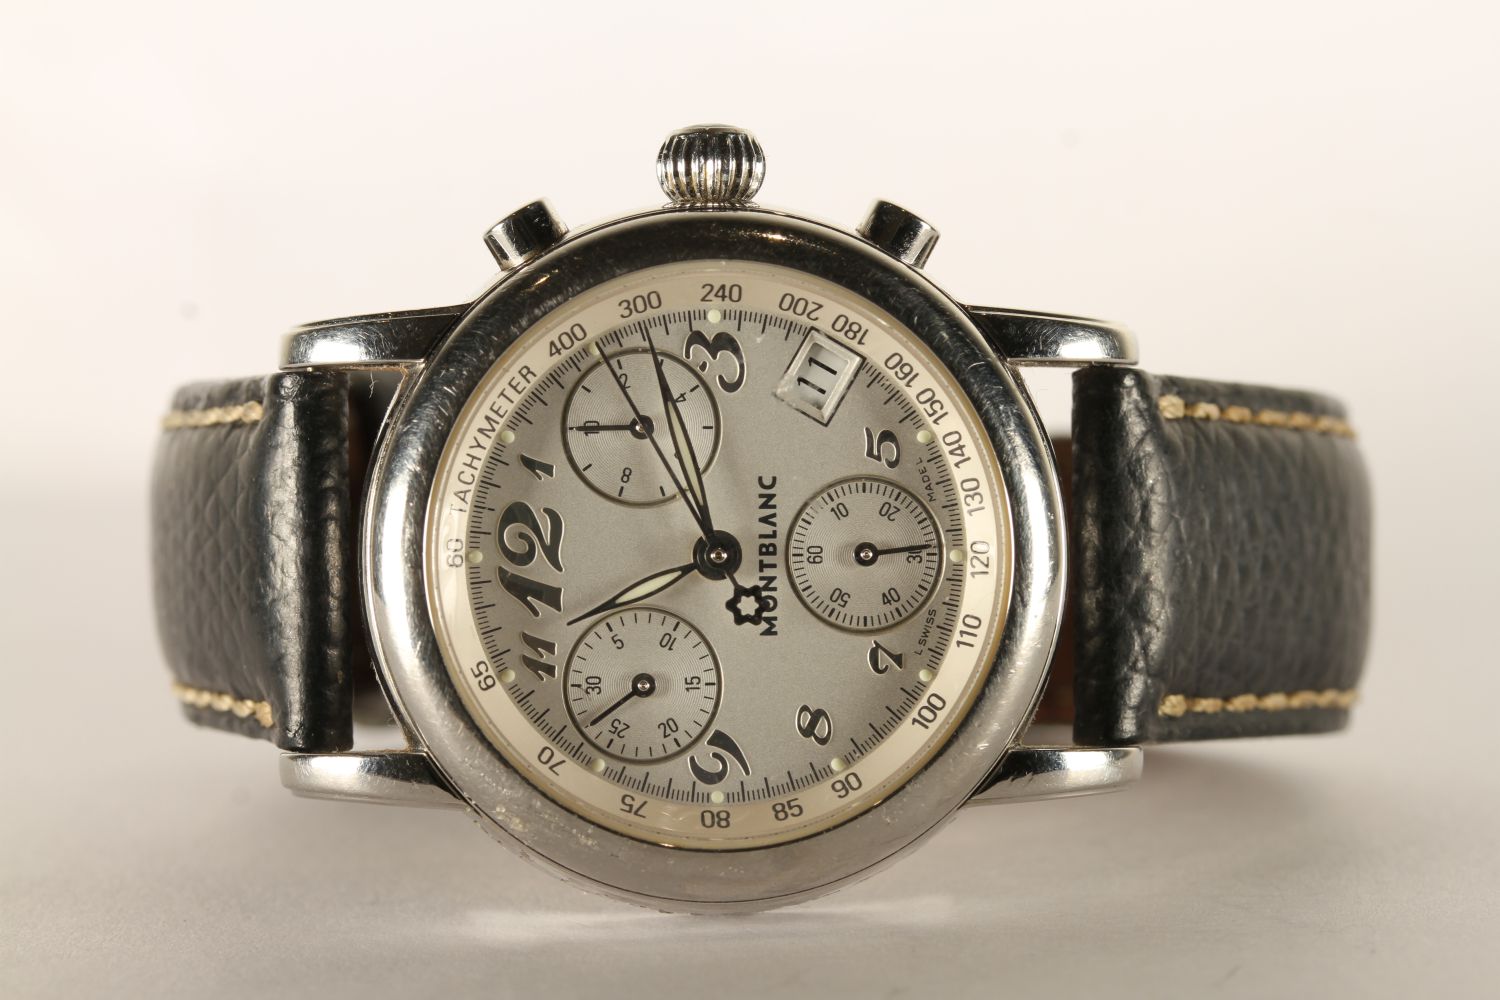 LADIES MONTBLANC MEISTERSTUCK CHRONOGRAPH WRISTWATCH REF 7039, circular silver dial with arabic